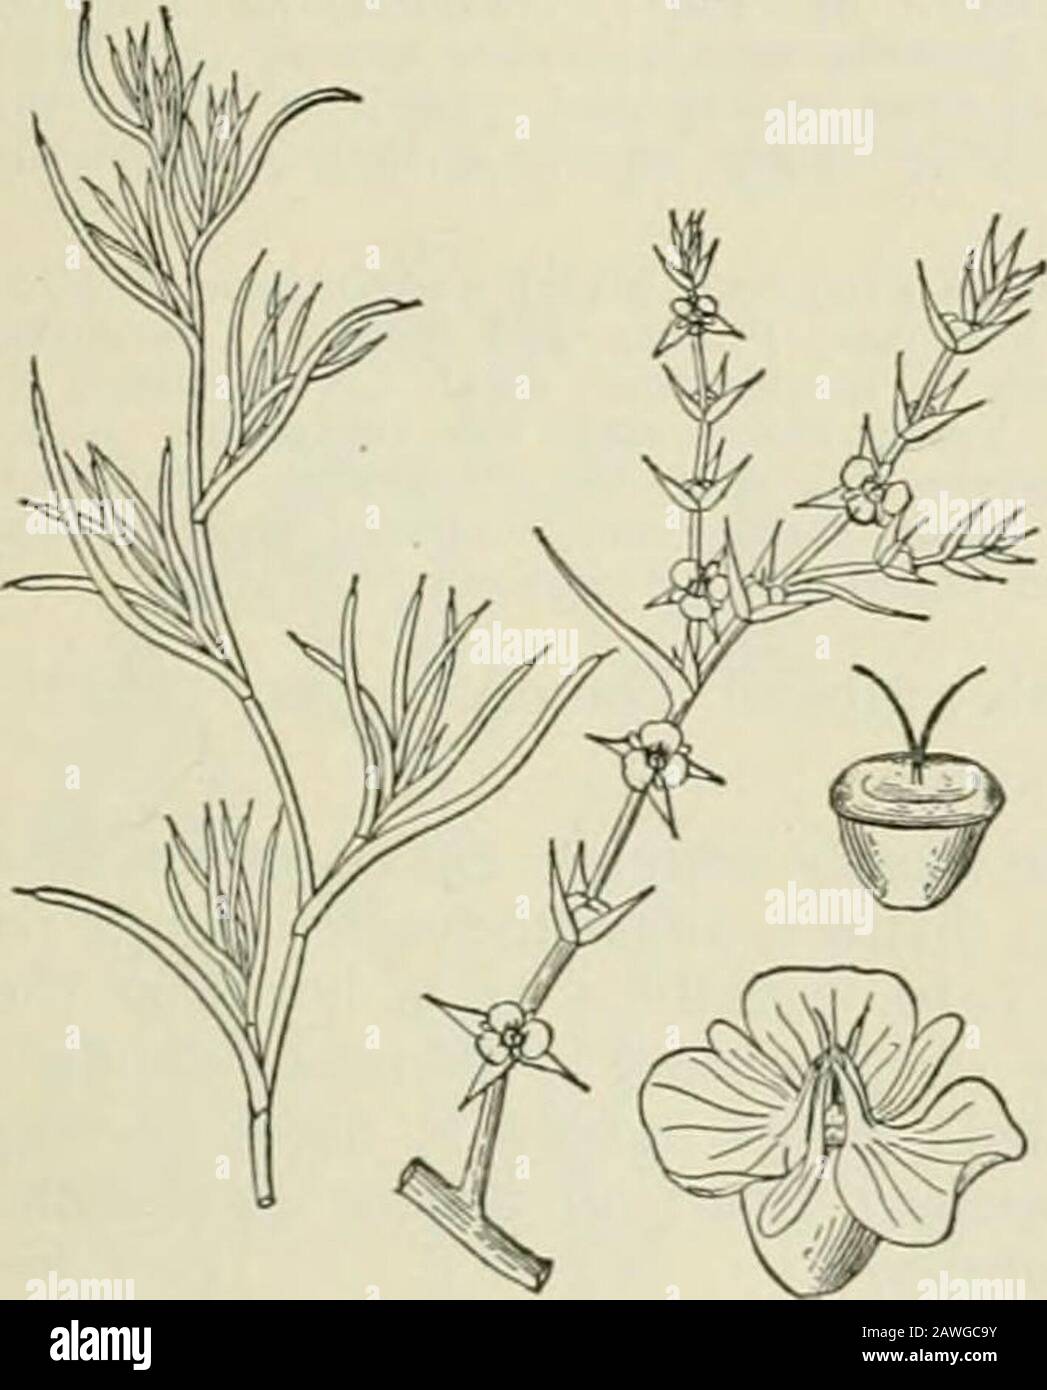 An illustrated flora of the northern United States, Canada and the British possessions : from Newfoundland to the parallel of the southern boundary of Virginia and from the Atlantic Ocean westward to the 102nd meridian; 2nd ed. . ceous, not conspicuously veined; plant maritime.Calyx membranous, very strongly veined ; plant an inland weed. 1. 5. Kali. 2. S. peslifer. Genus 14. GOOSEFOOT FAMILY. I. Salsola Kali L. Saltwort. PricklyGlasswort. Fig. 1713. Salsola Kali L. Sp. PI. 222. 1753.Salsola Tragus L. Sp. PI. Ed. 2, 322. 1762.Salsola caroliniana Walt. FI. Car. iii. 1788. Annual, glabrous or of Stock Photo